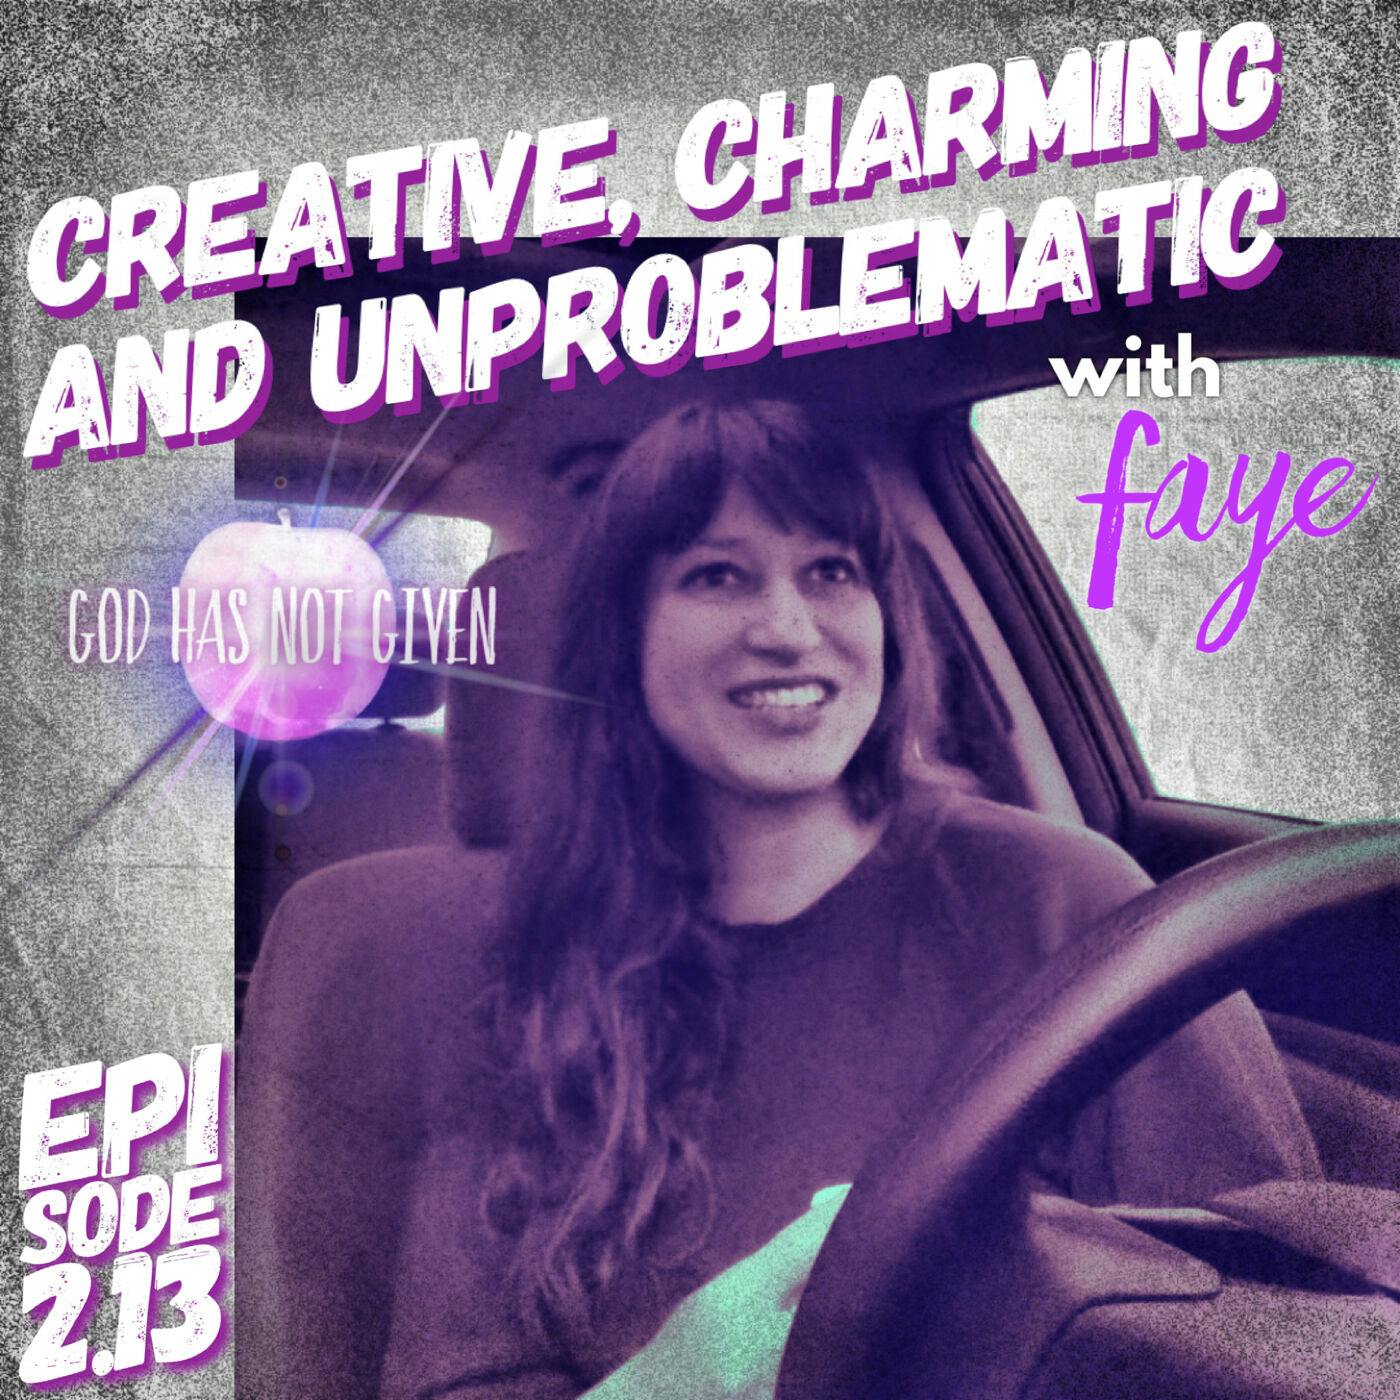 CREATIVE, CHARMING AND UNPROBLEMATIC with Faye